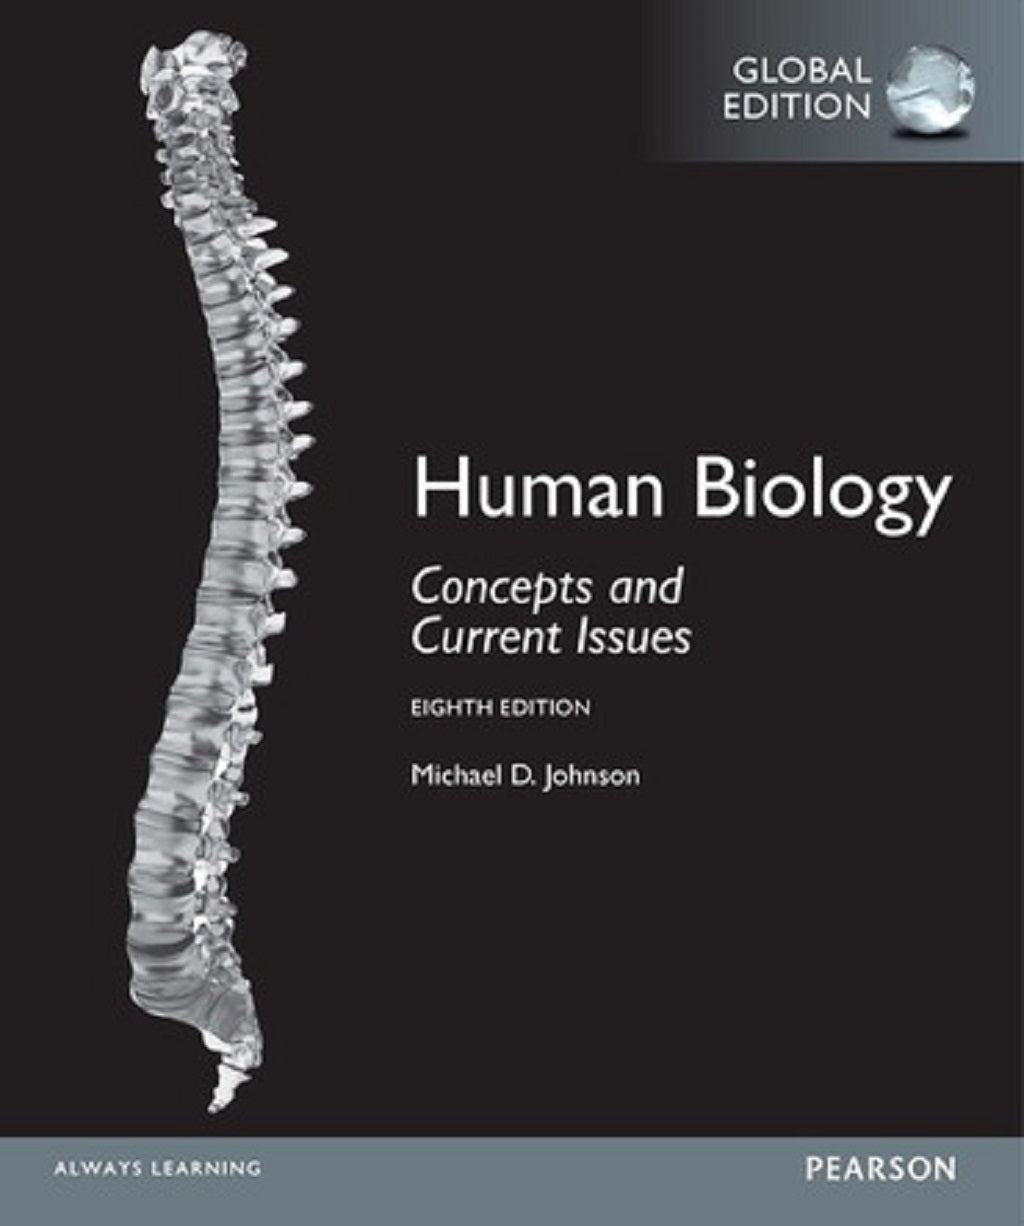 Human Biology, Global 8th Edition: Concepts and Current Issues